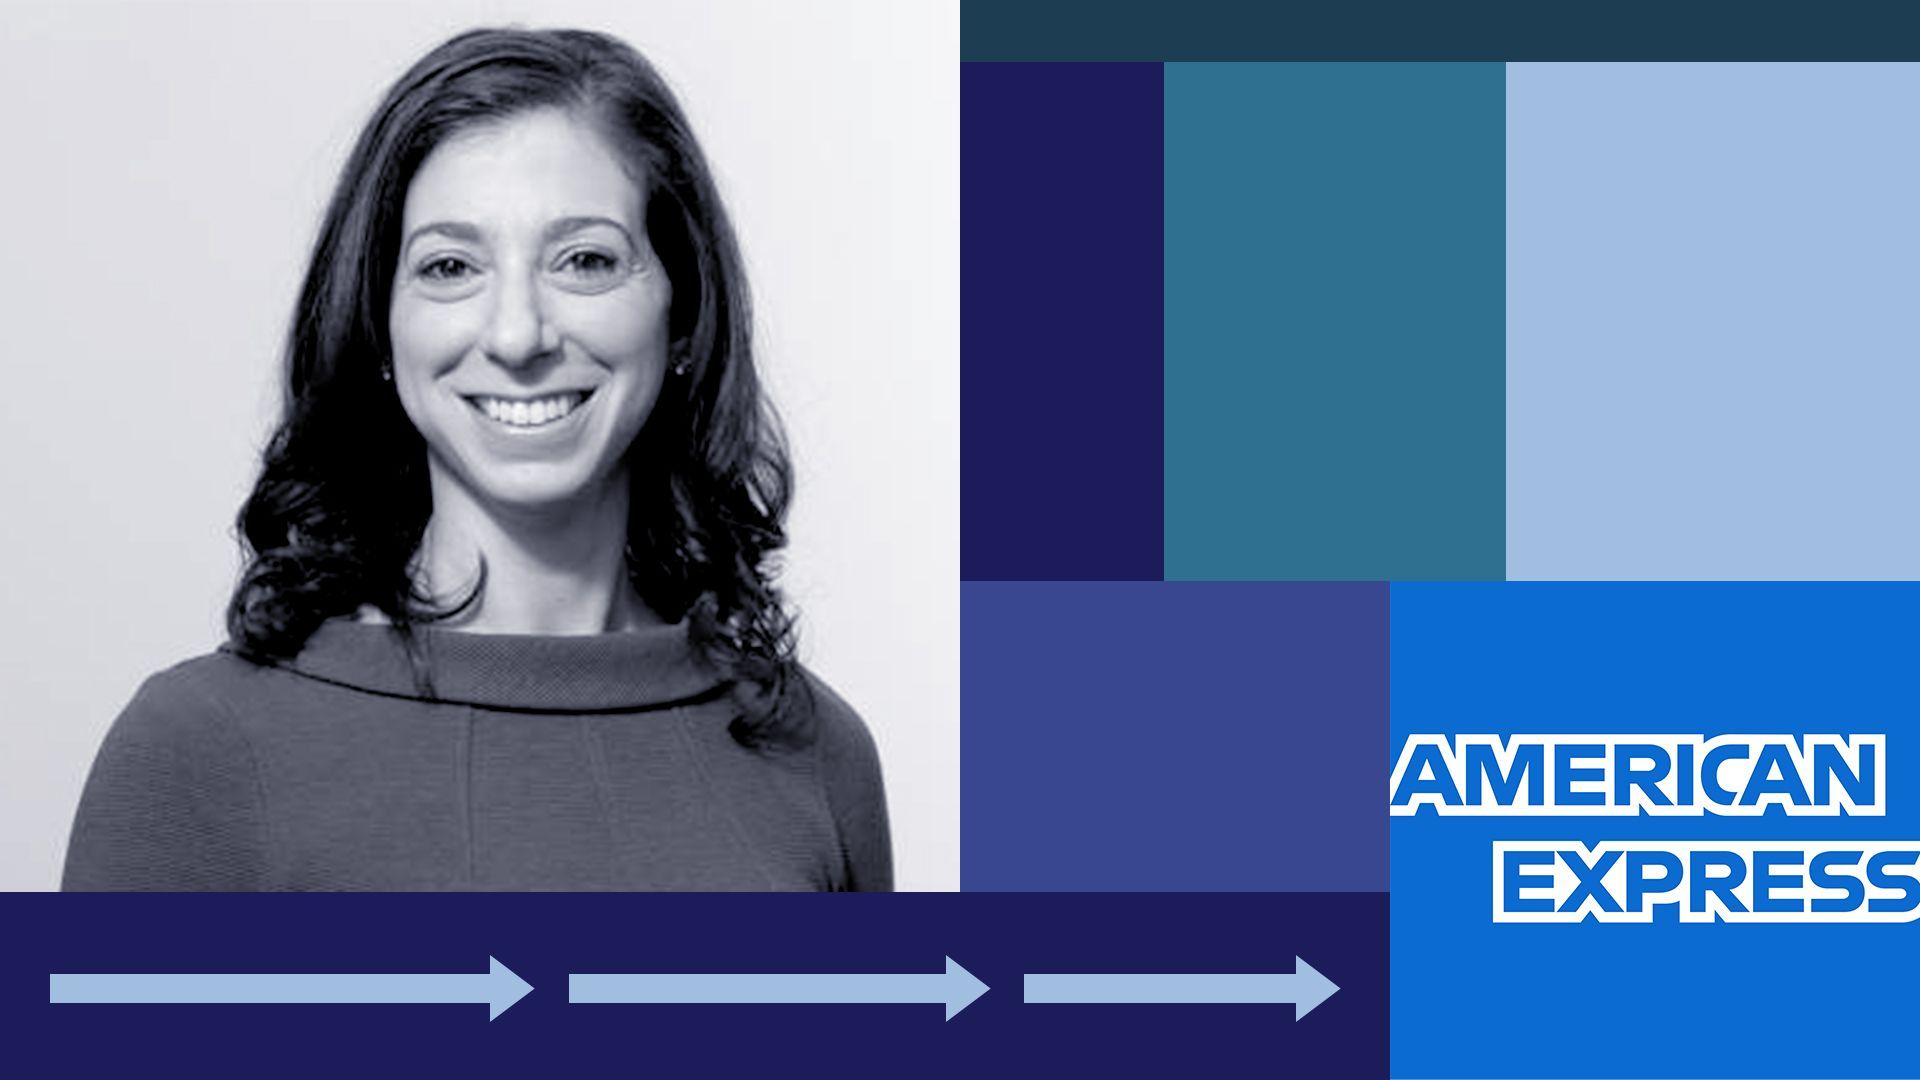 Photo illustration of Giovanna Falbo with the American Express logo.